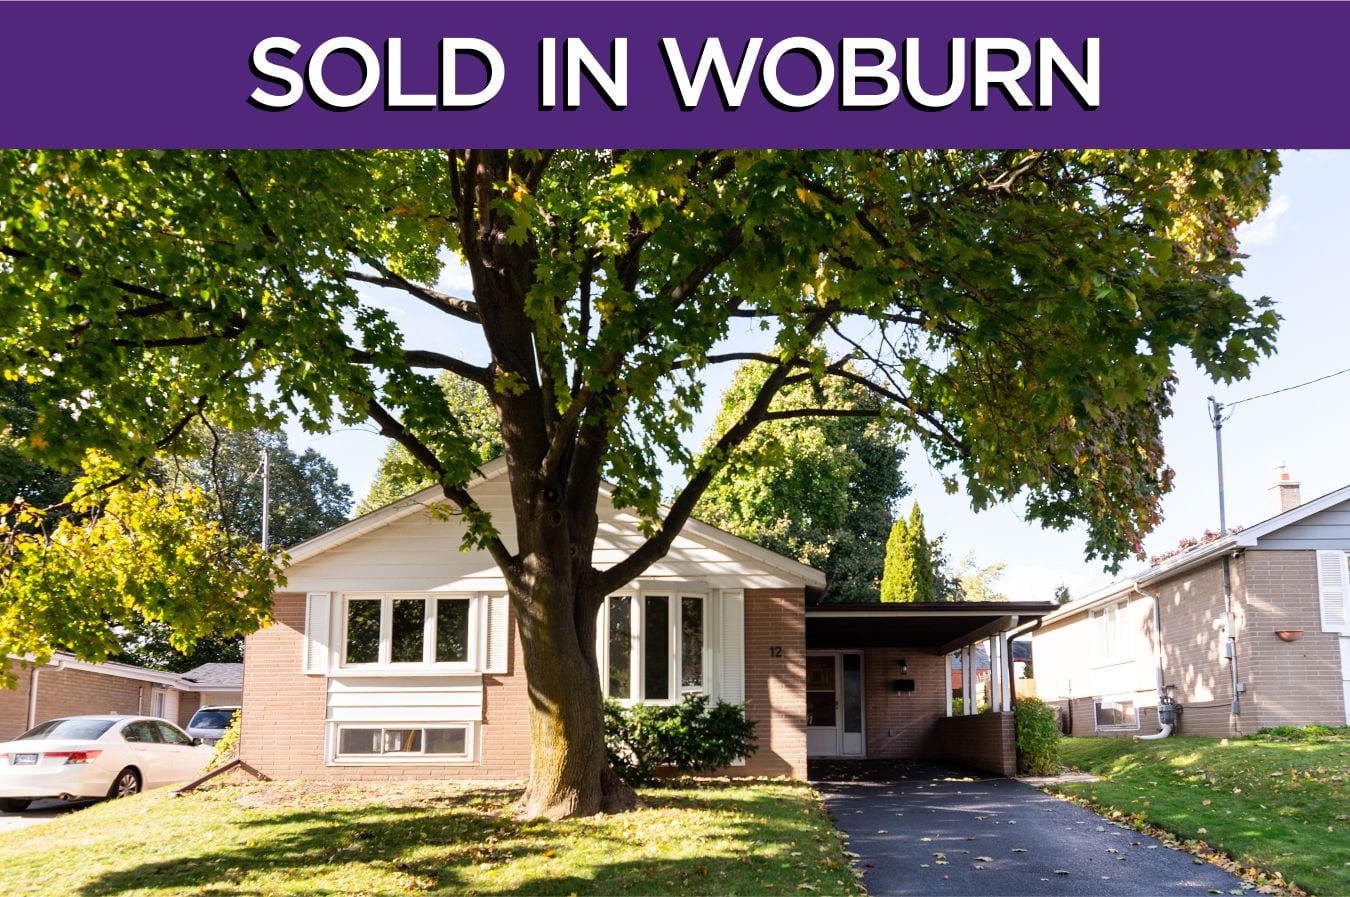 12 Benorama Crescent - Sold In Woburn, Scarborough's Best Real Estate Agents